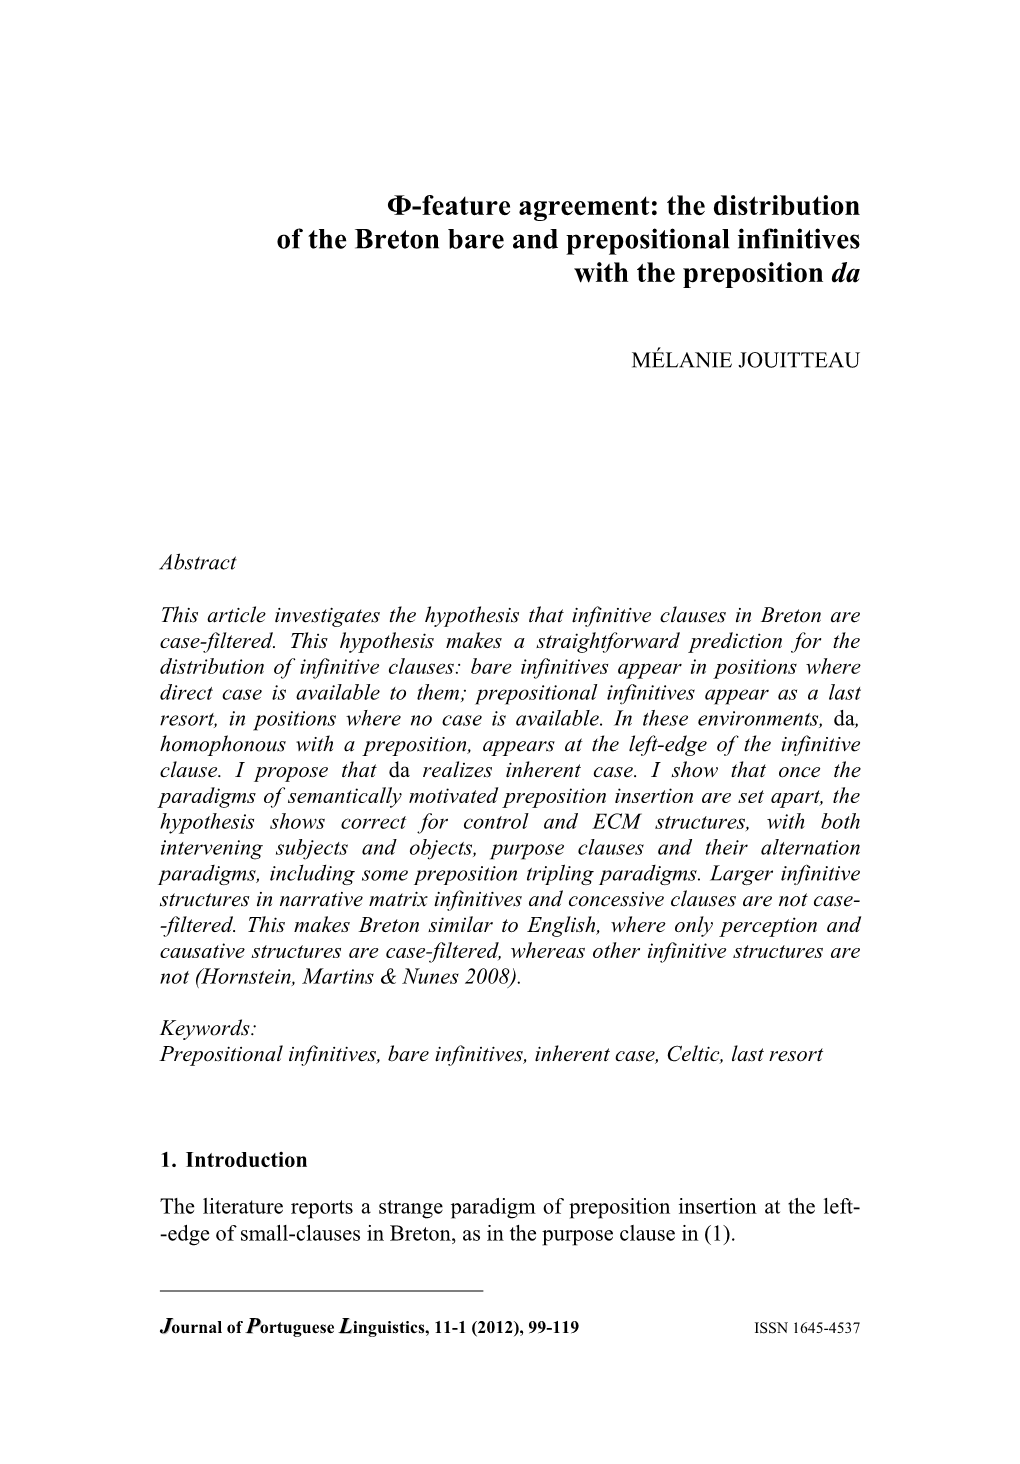 Ф-Feature Agreement: the Distribution of the Breton Bare and Prepositional Infinitives with the Preposition Da